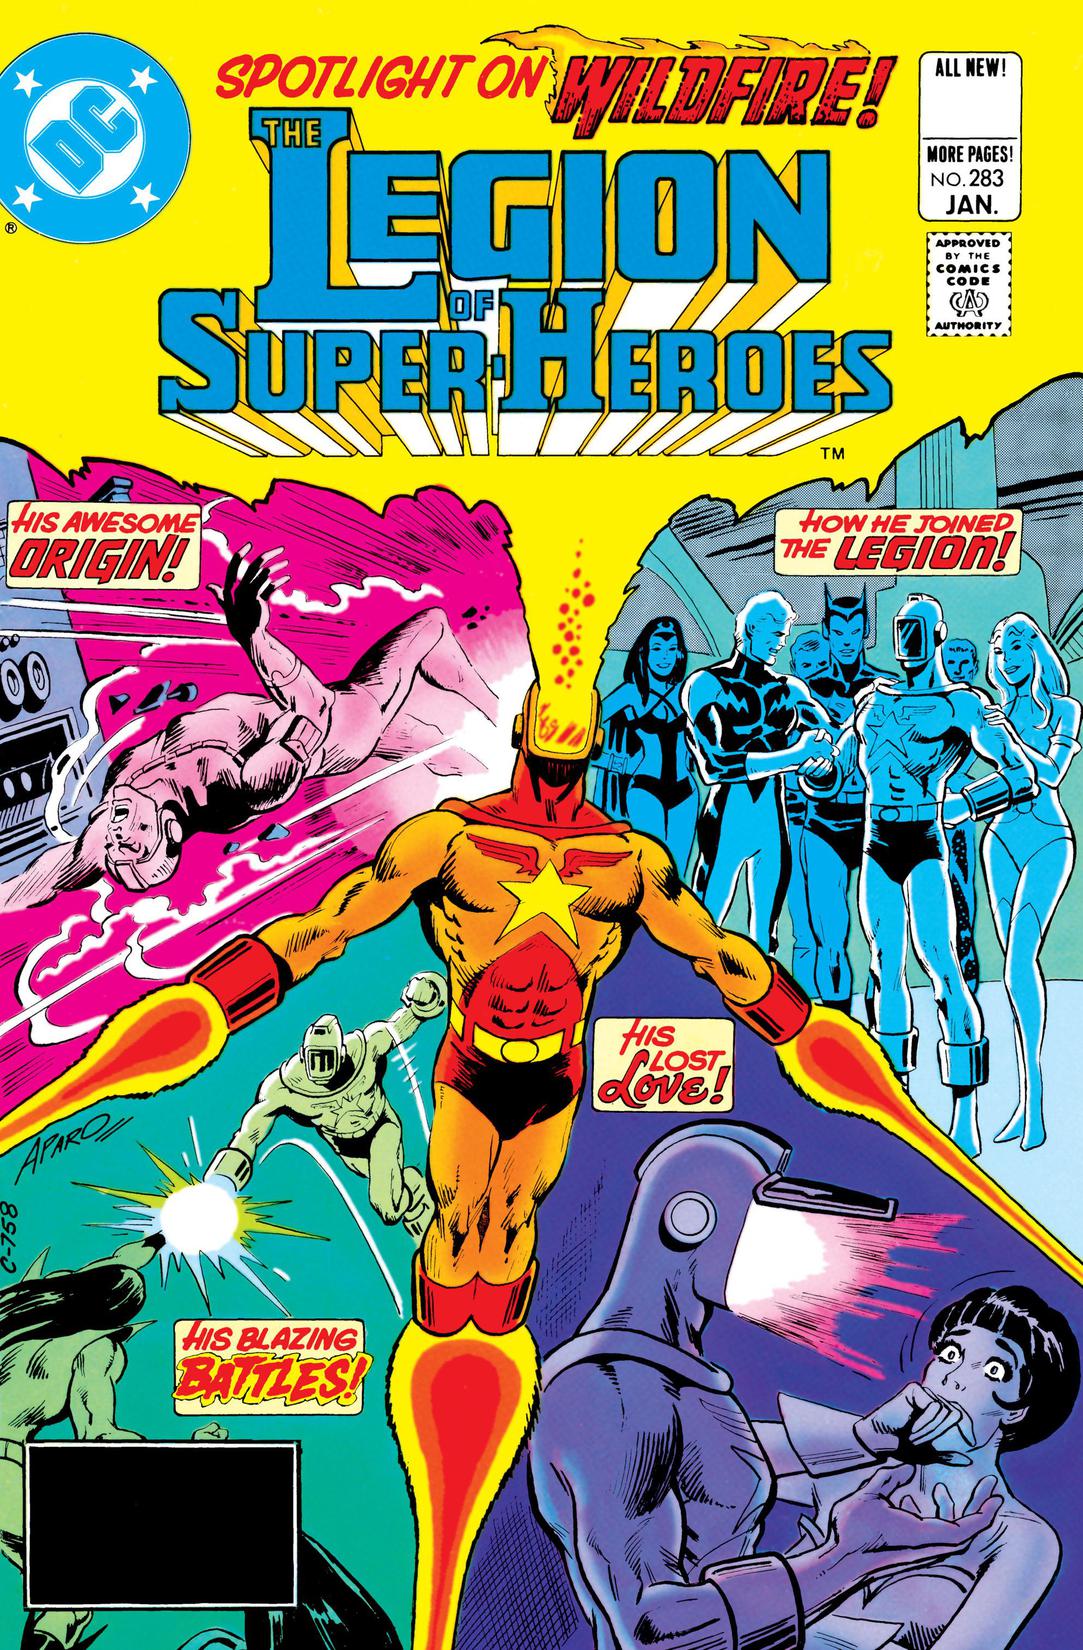 The Legion of Super-Heroes (1980-) #283 preview images